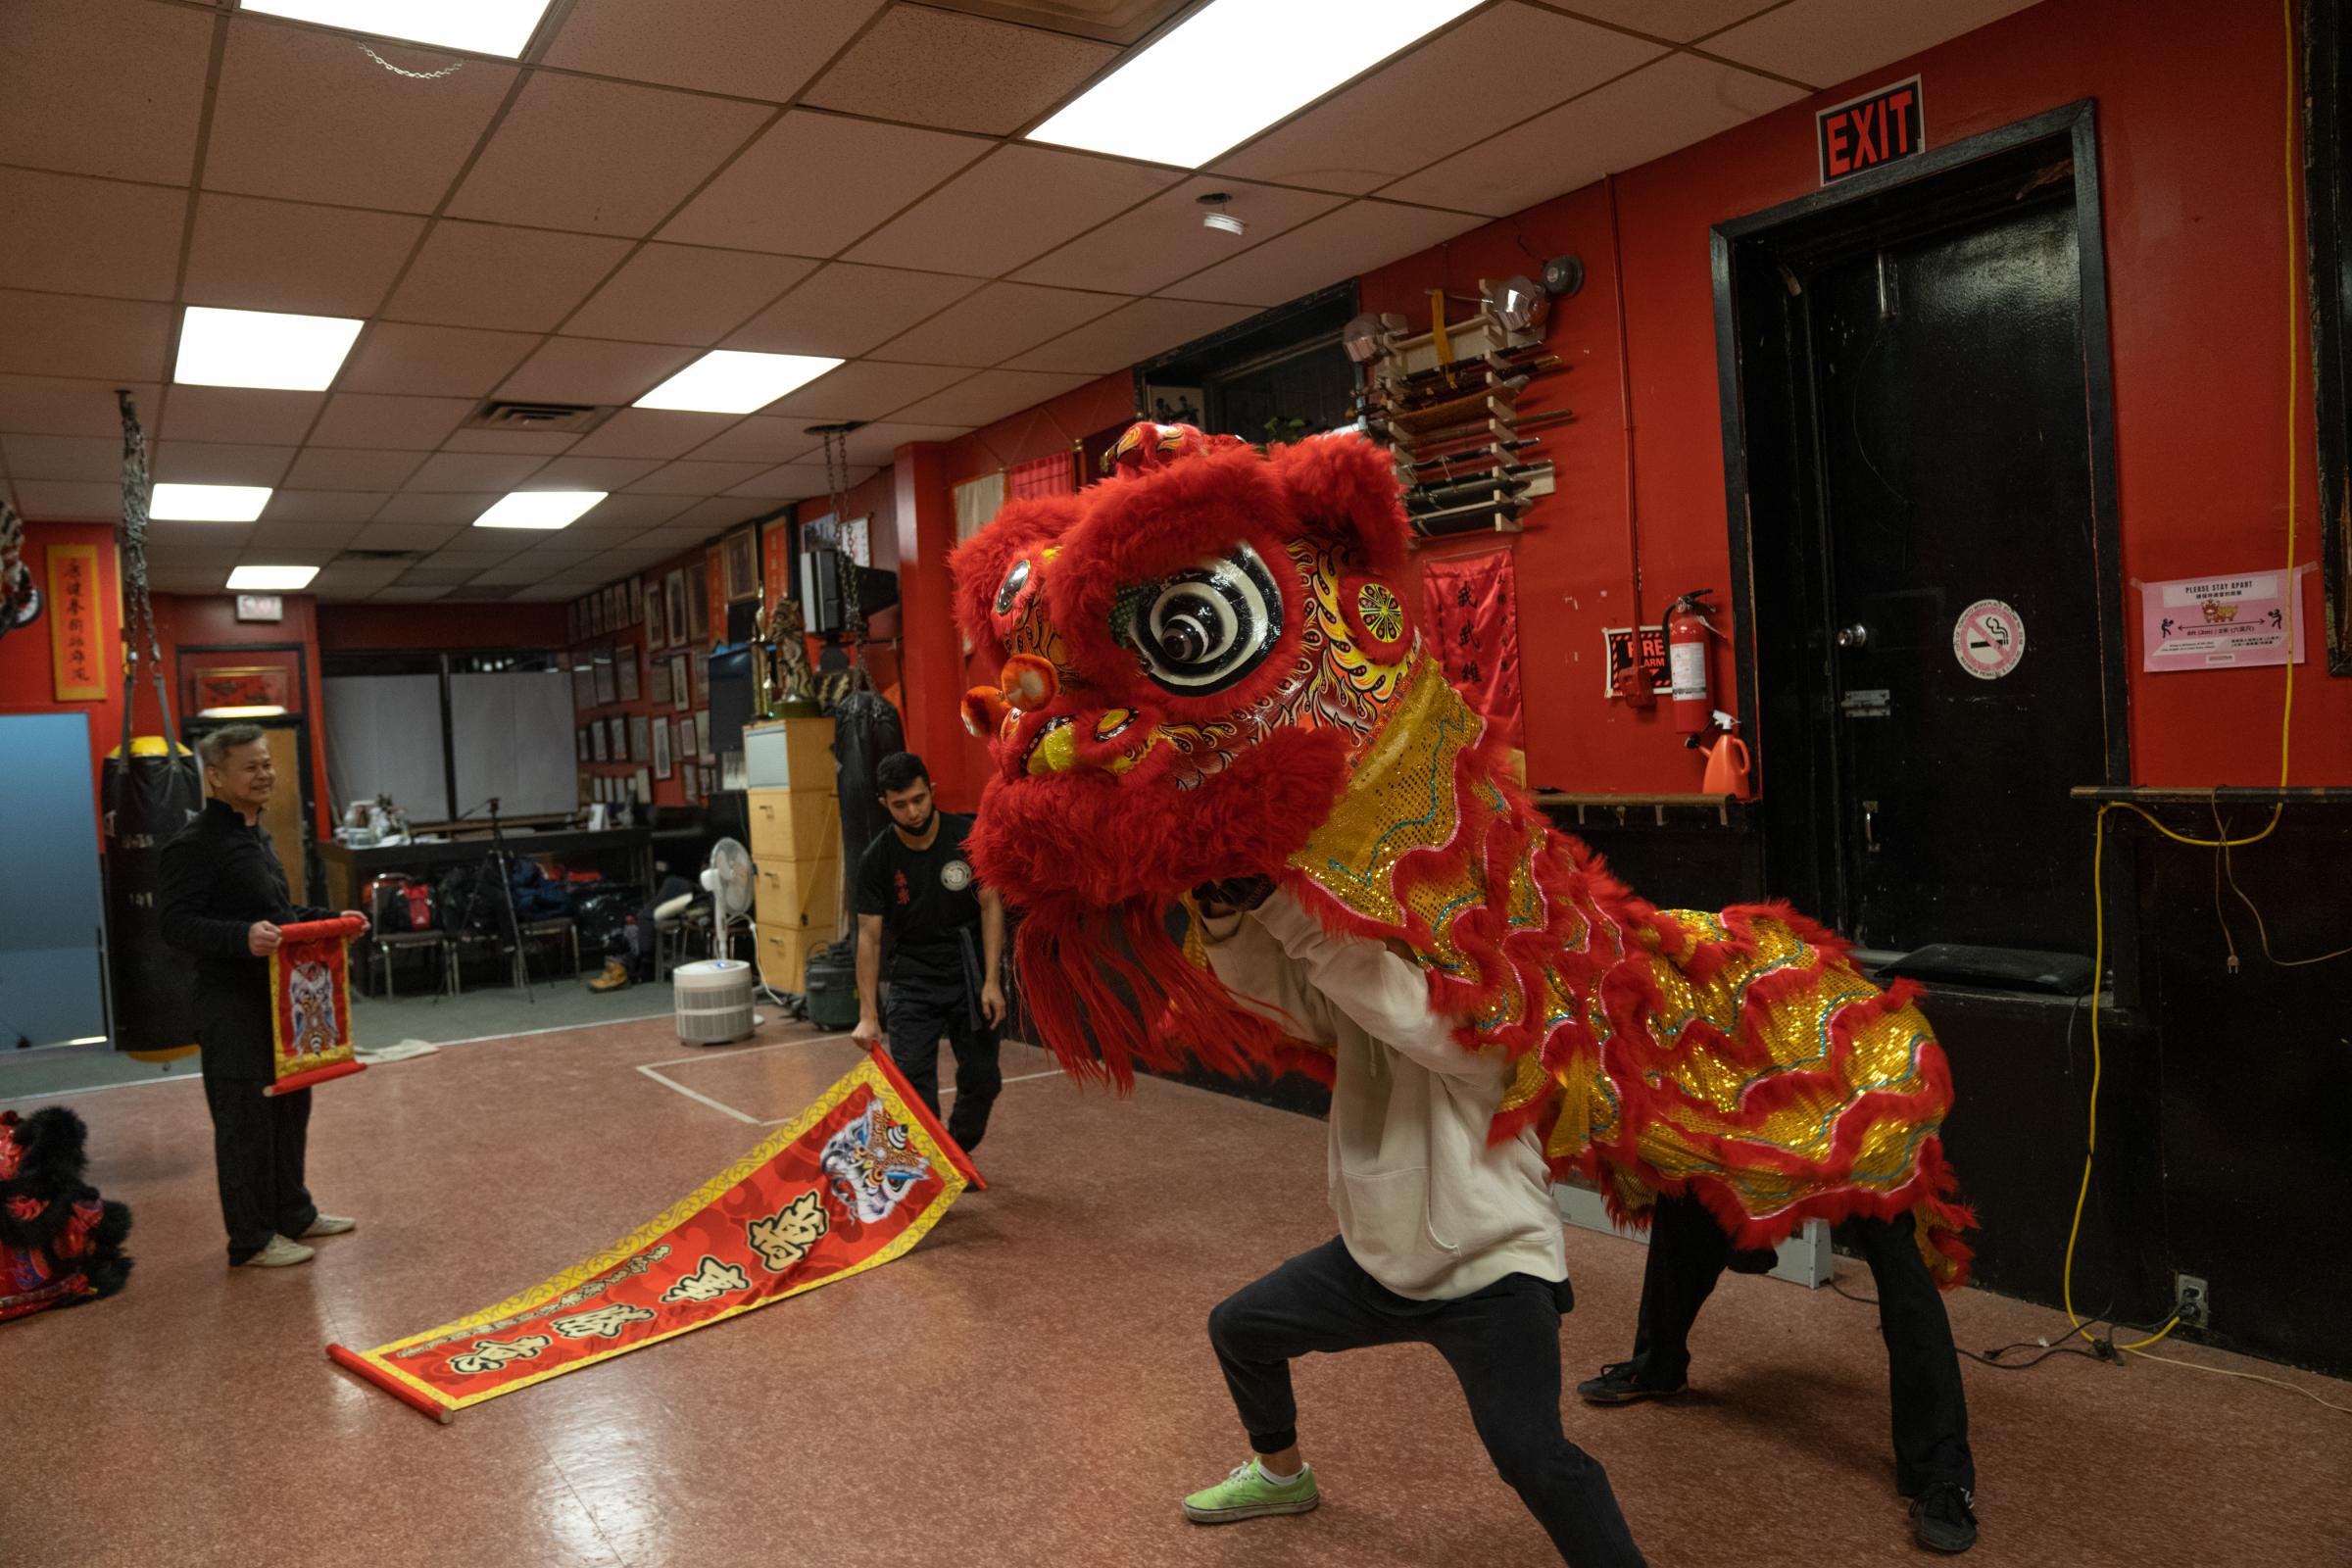 Members of the lion dance team at the Hong Luck Kung Fu Club using a golden and red lion during practice in preparation for the 2022 Lunar New Year on January 20, 2022. Hong Luck Kung Fu Club is a multi-generational martial arts studio in Toronto’s Chinatown, which started in 1961. With Chinese New Year around the corner, this group is preparing for lion dance performances for the local senior community, as a symbolic act to bring in health, luck, and life. (Photo by Katherine Cheng/Globe and Mail).